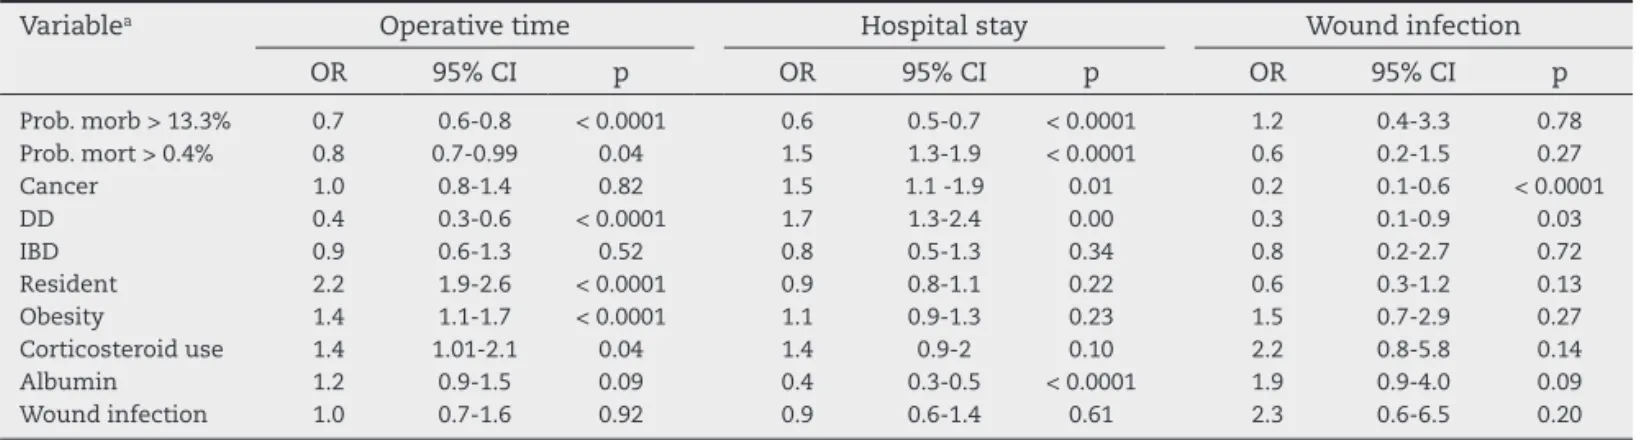 Table 8 – Multivariate analysis: factors associated with wound infection, operative time, and hospital stay.